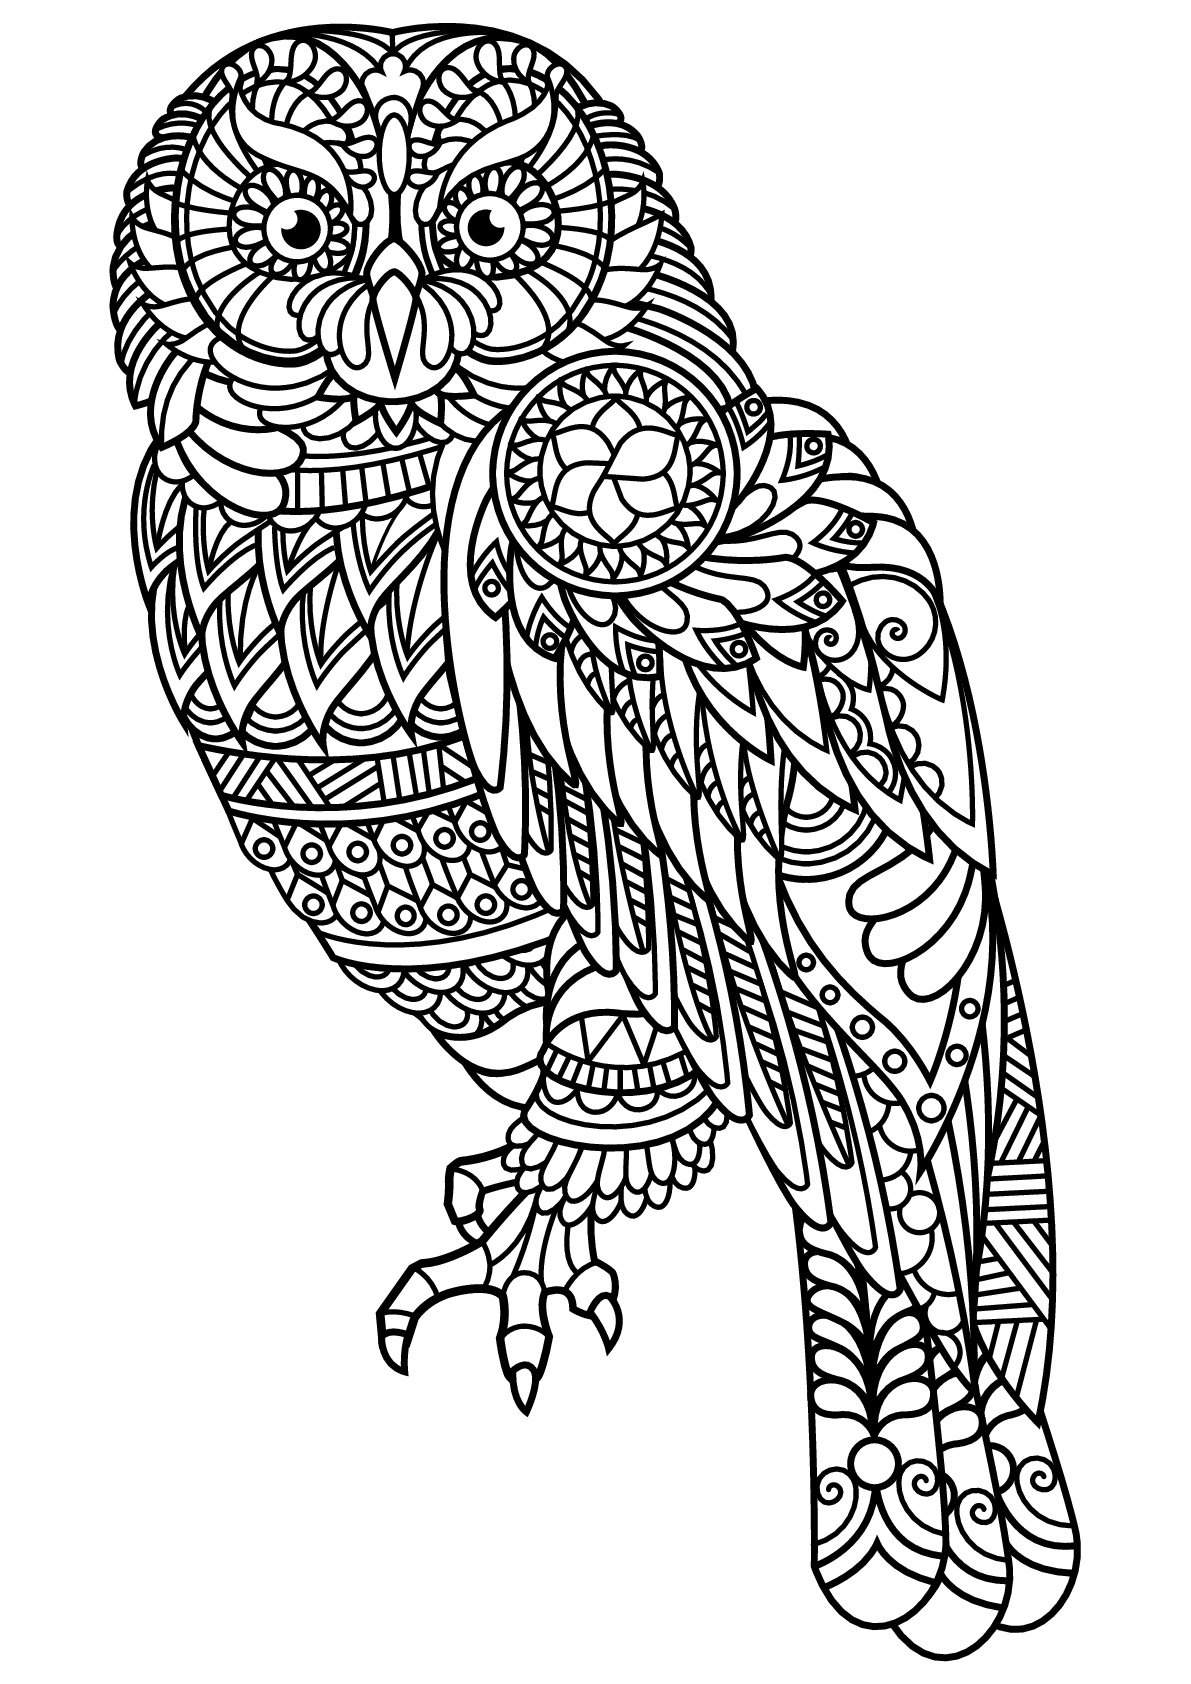 free-book-owl-owls-adult-coloring-pages